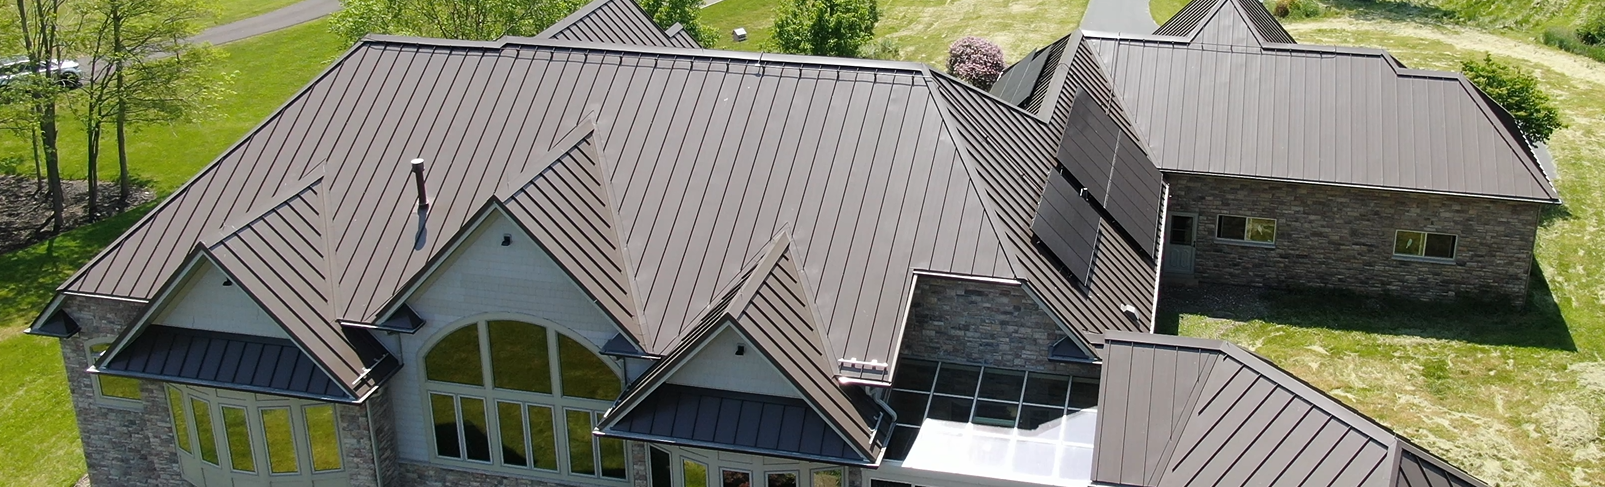 roofing rochester metal roofing